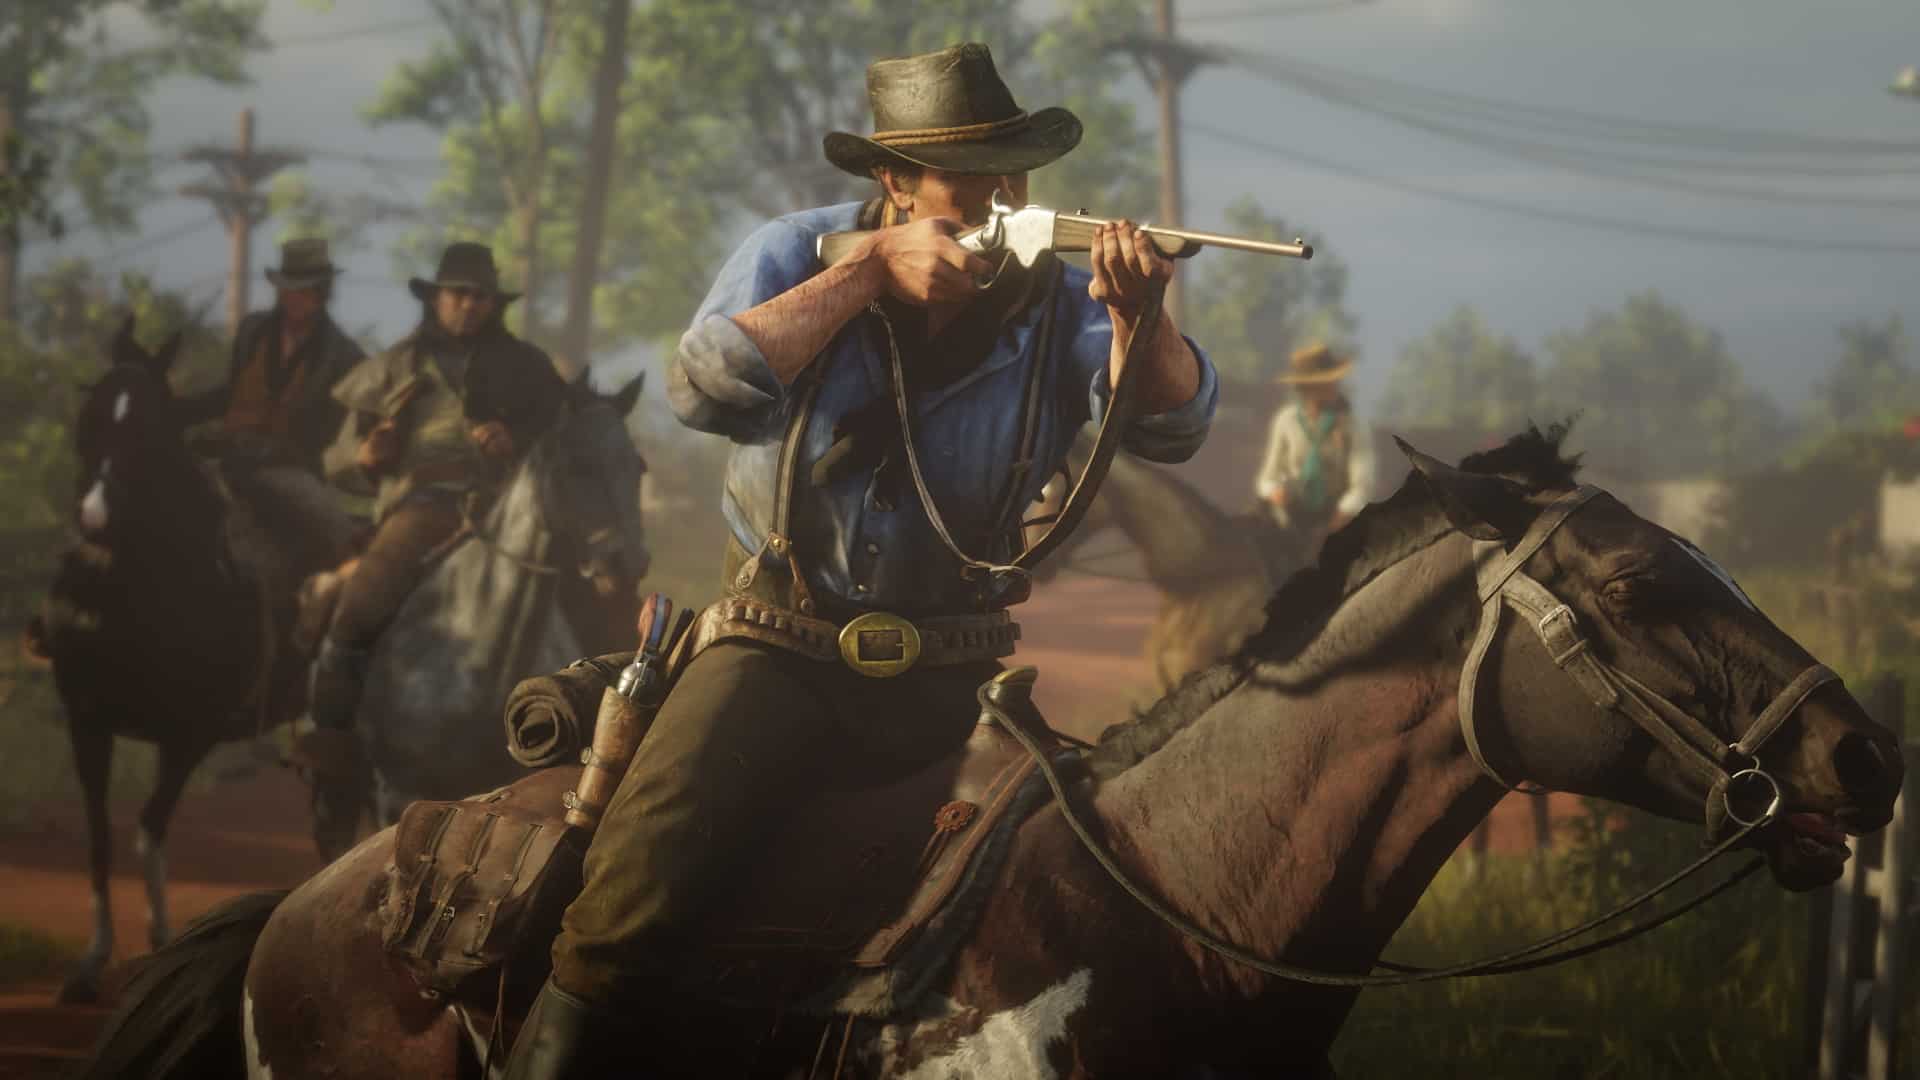 Red Dead Redemption 2  Official NVIDIA DLSS 4K Launch Trailer - Available  Now 